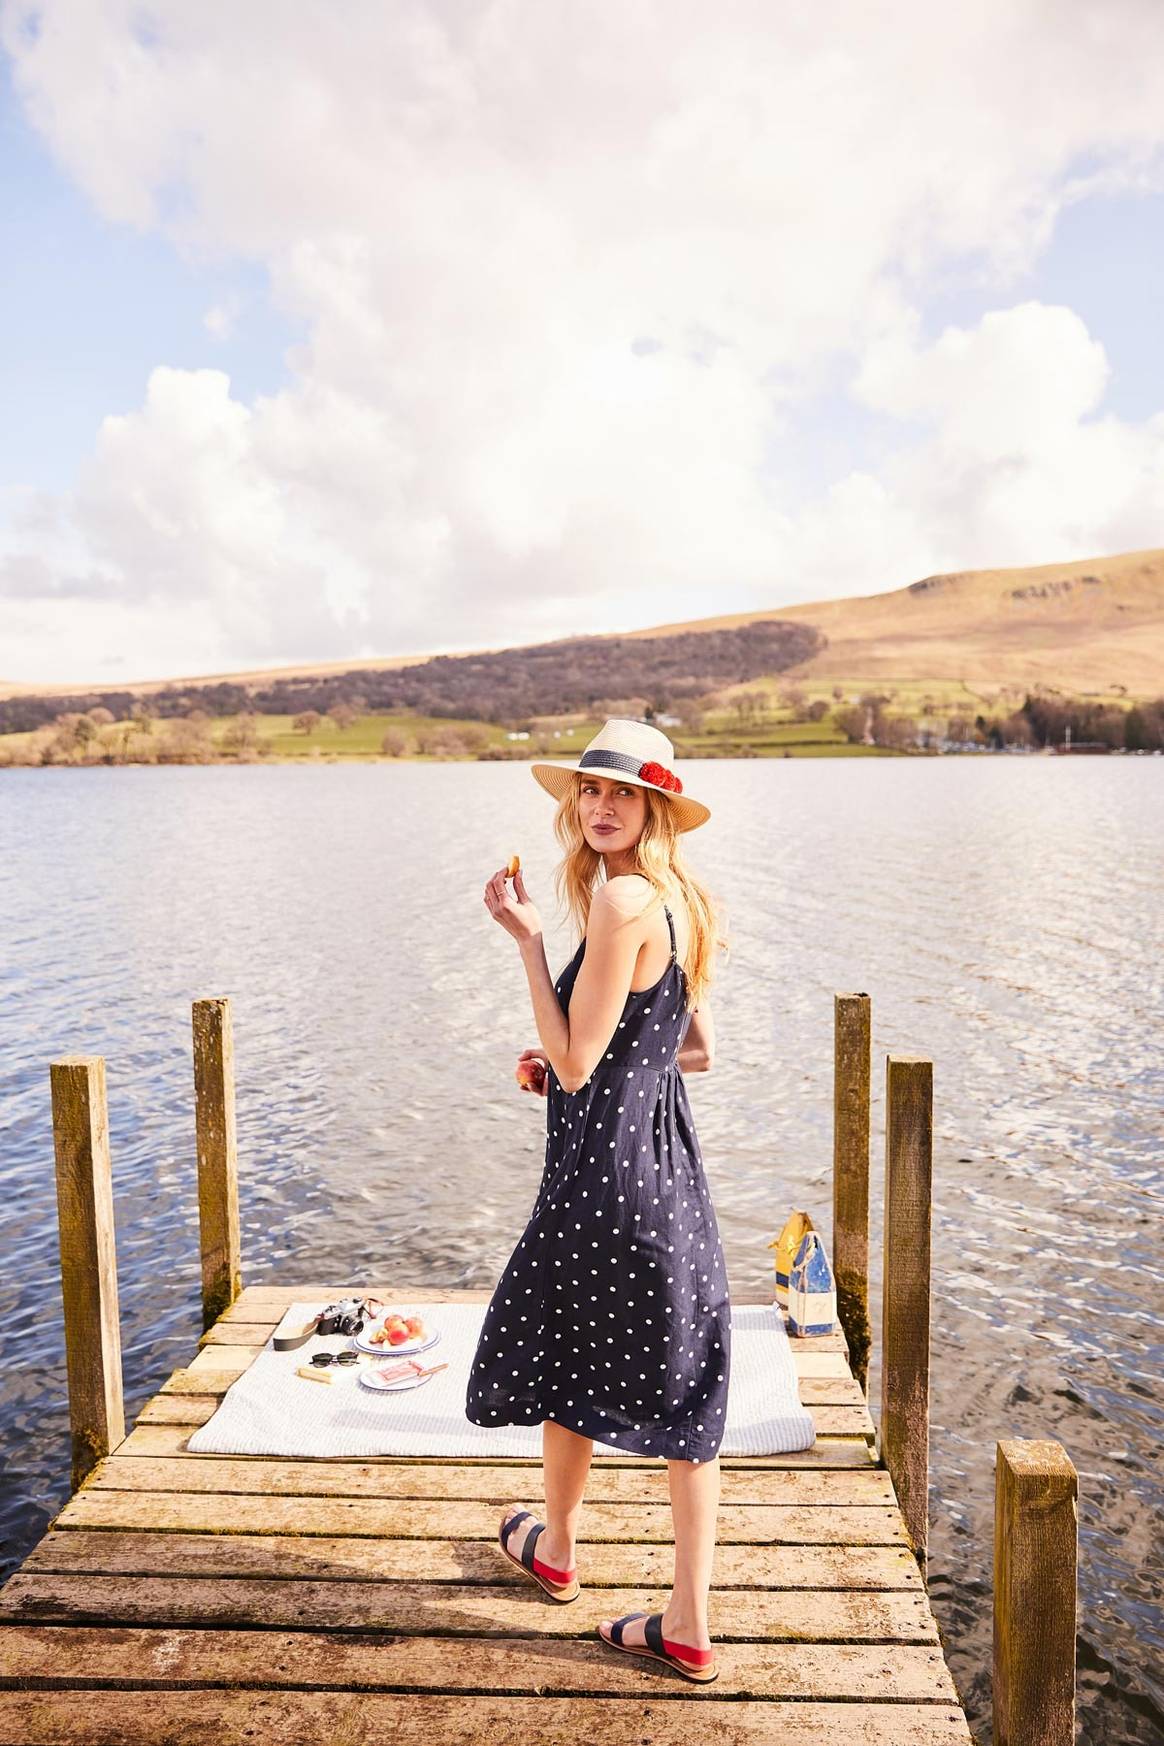 Joules boosted by international growth